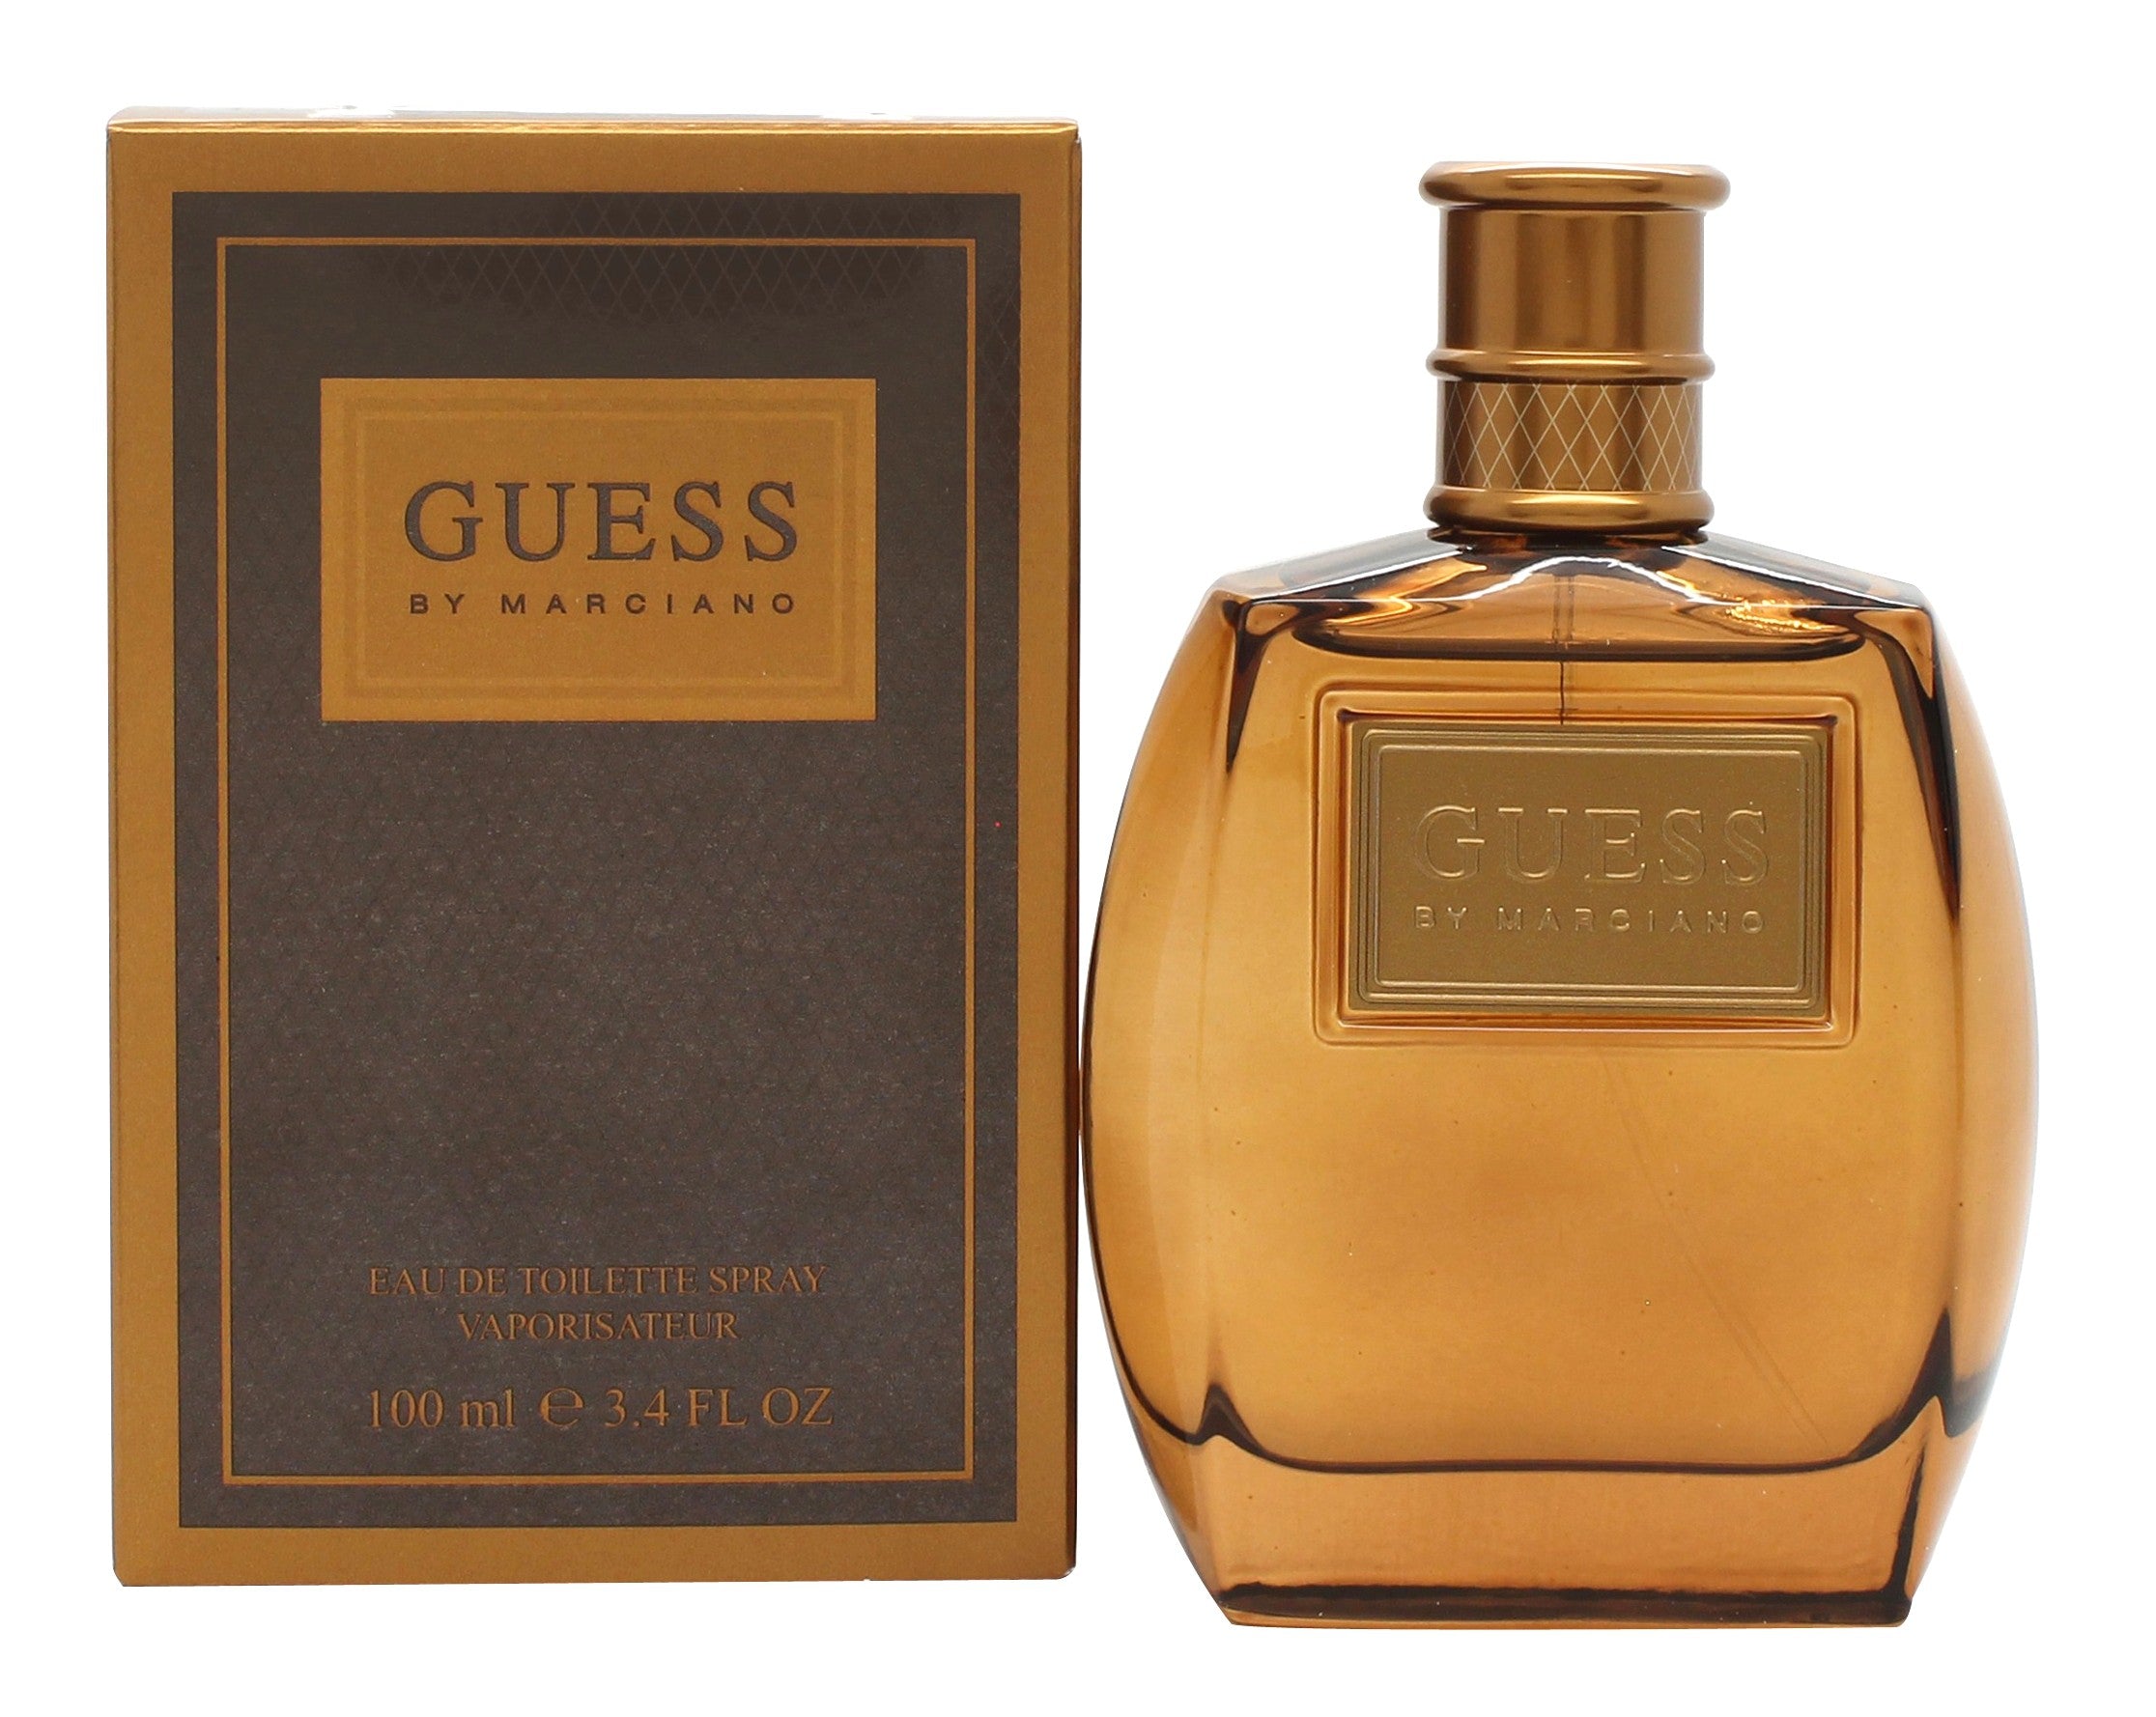 View Guess Guess by Marciano Eau de Toilette 100ml Spray information